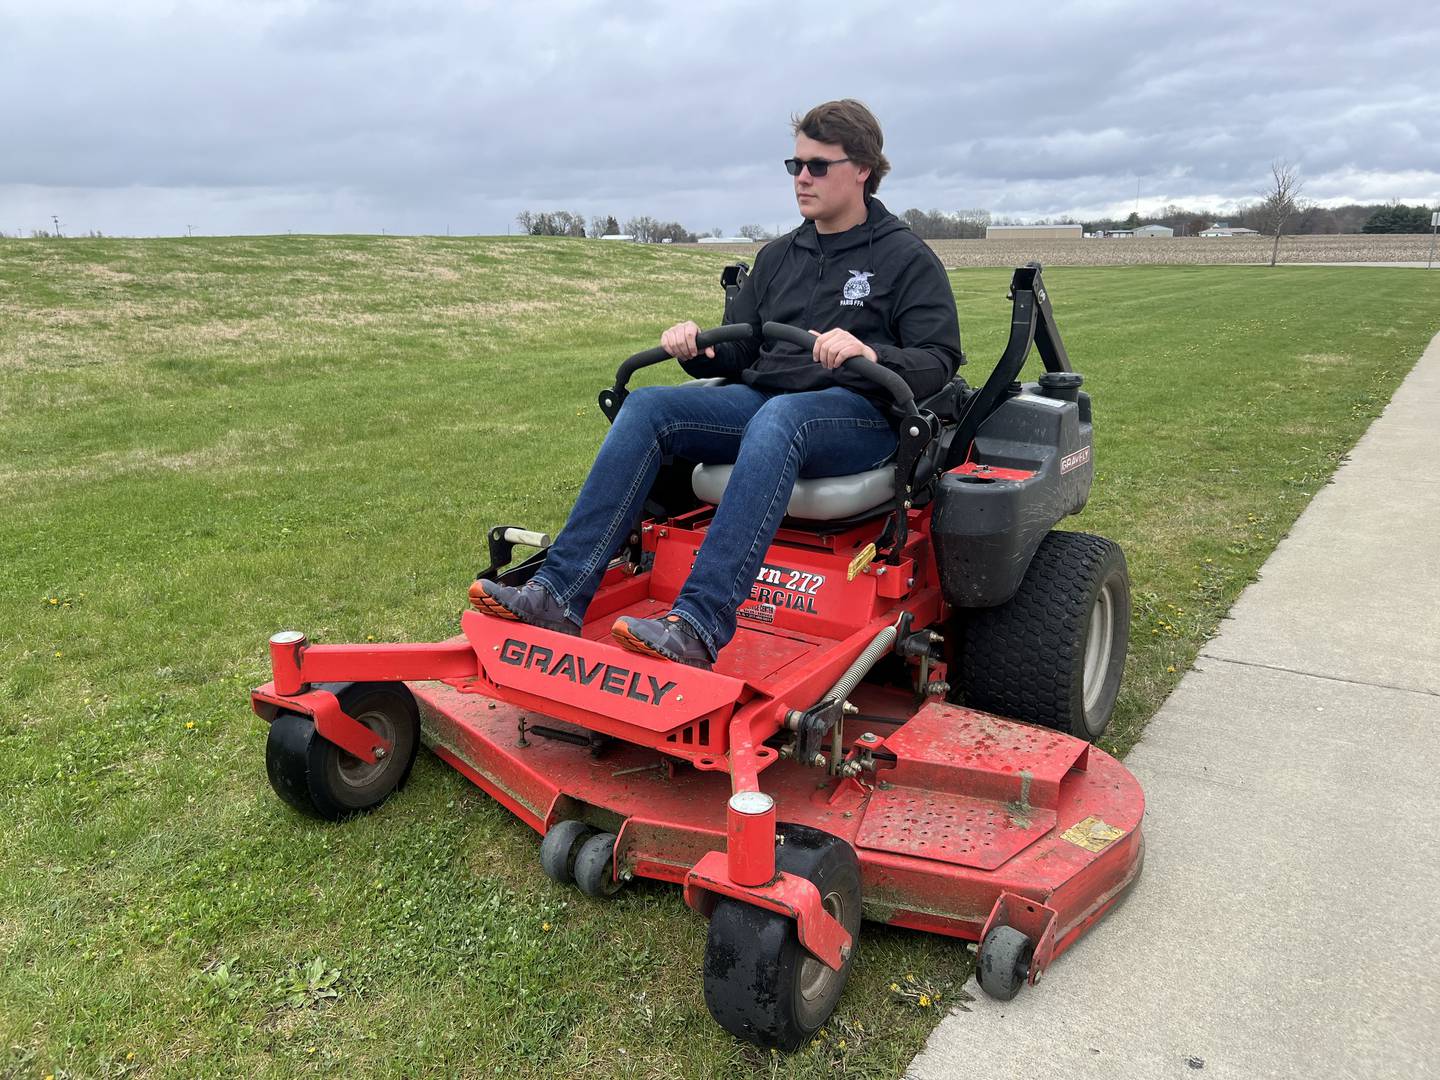 Logan Dick mows lawns and does a variety of landscaping jobs for his customers. He recently started to offer excavation services through his Dick’s Lawn Service business.